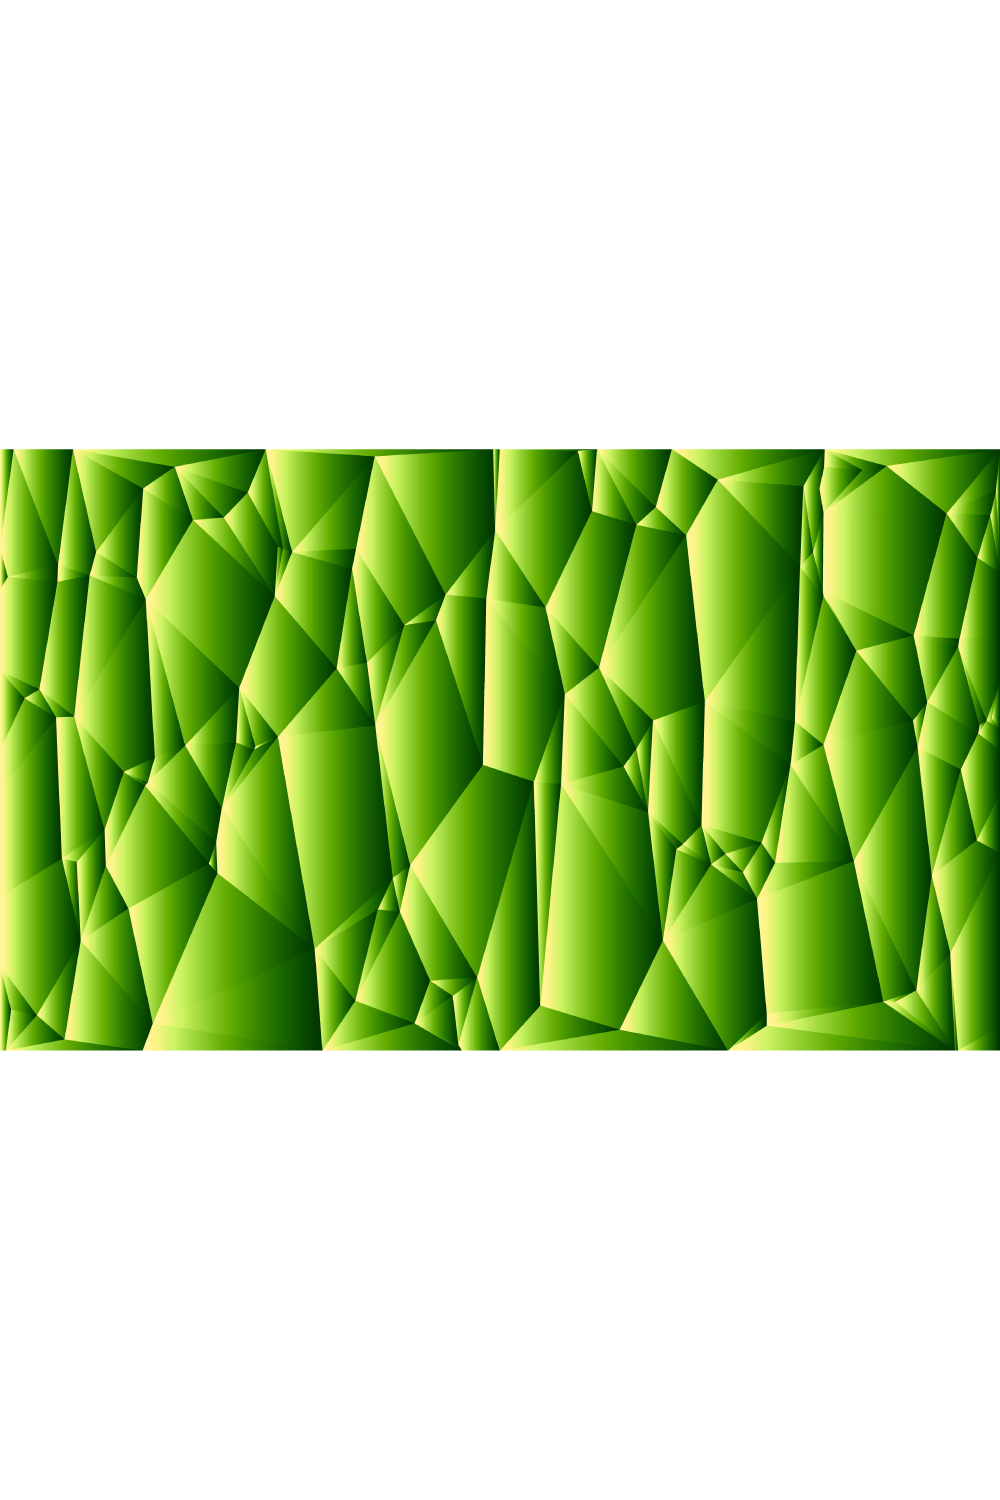 Geometric abstract luxury green background pinterest preview image.